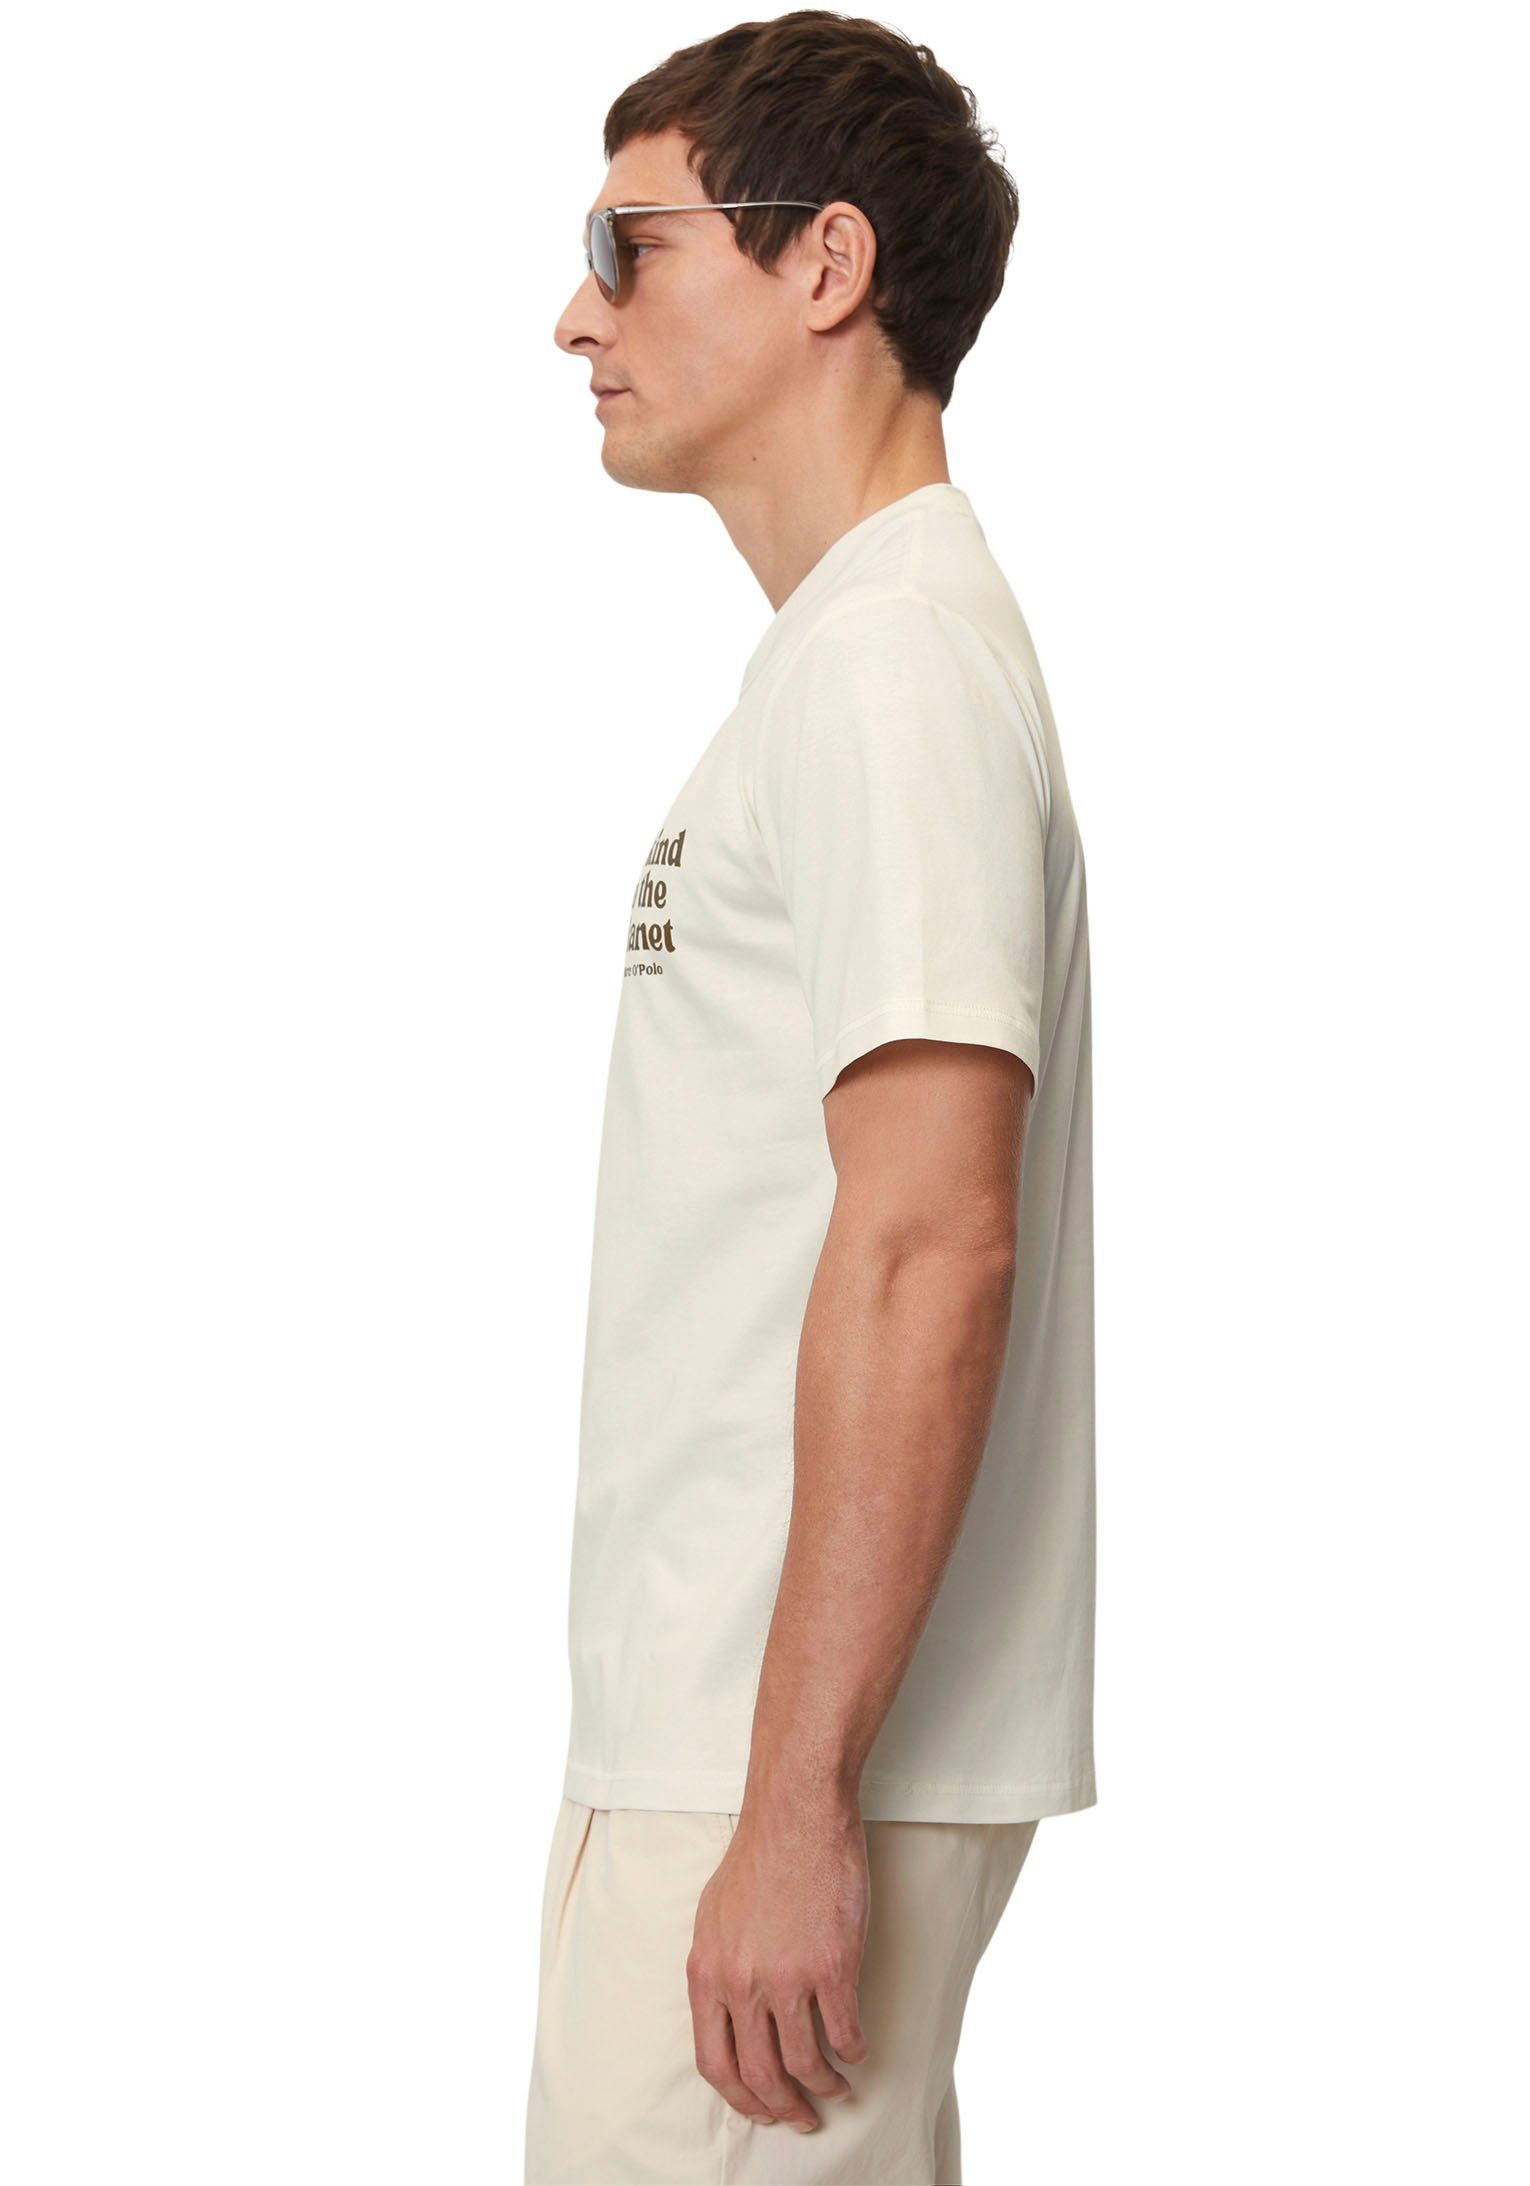 Marc O'Polo T-Shirt mit Statement-Print in altweiss Brusthöhe